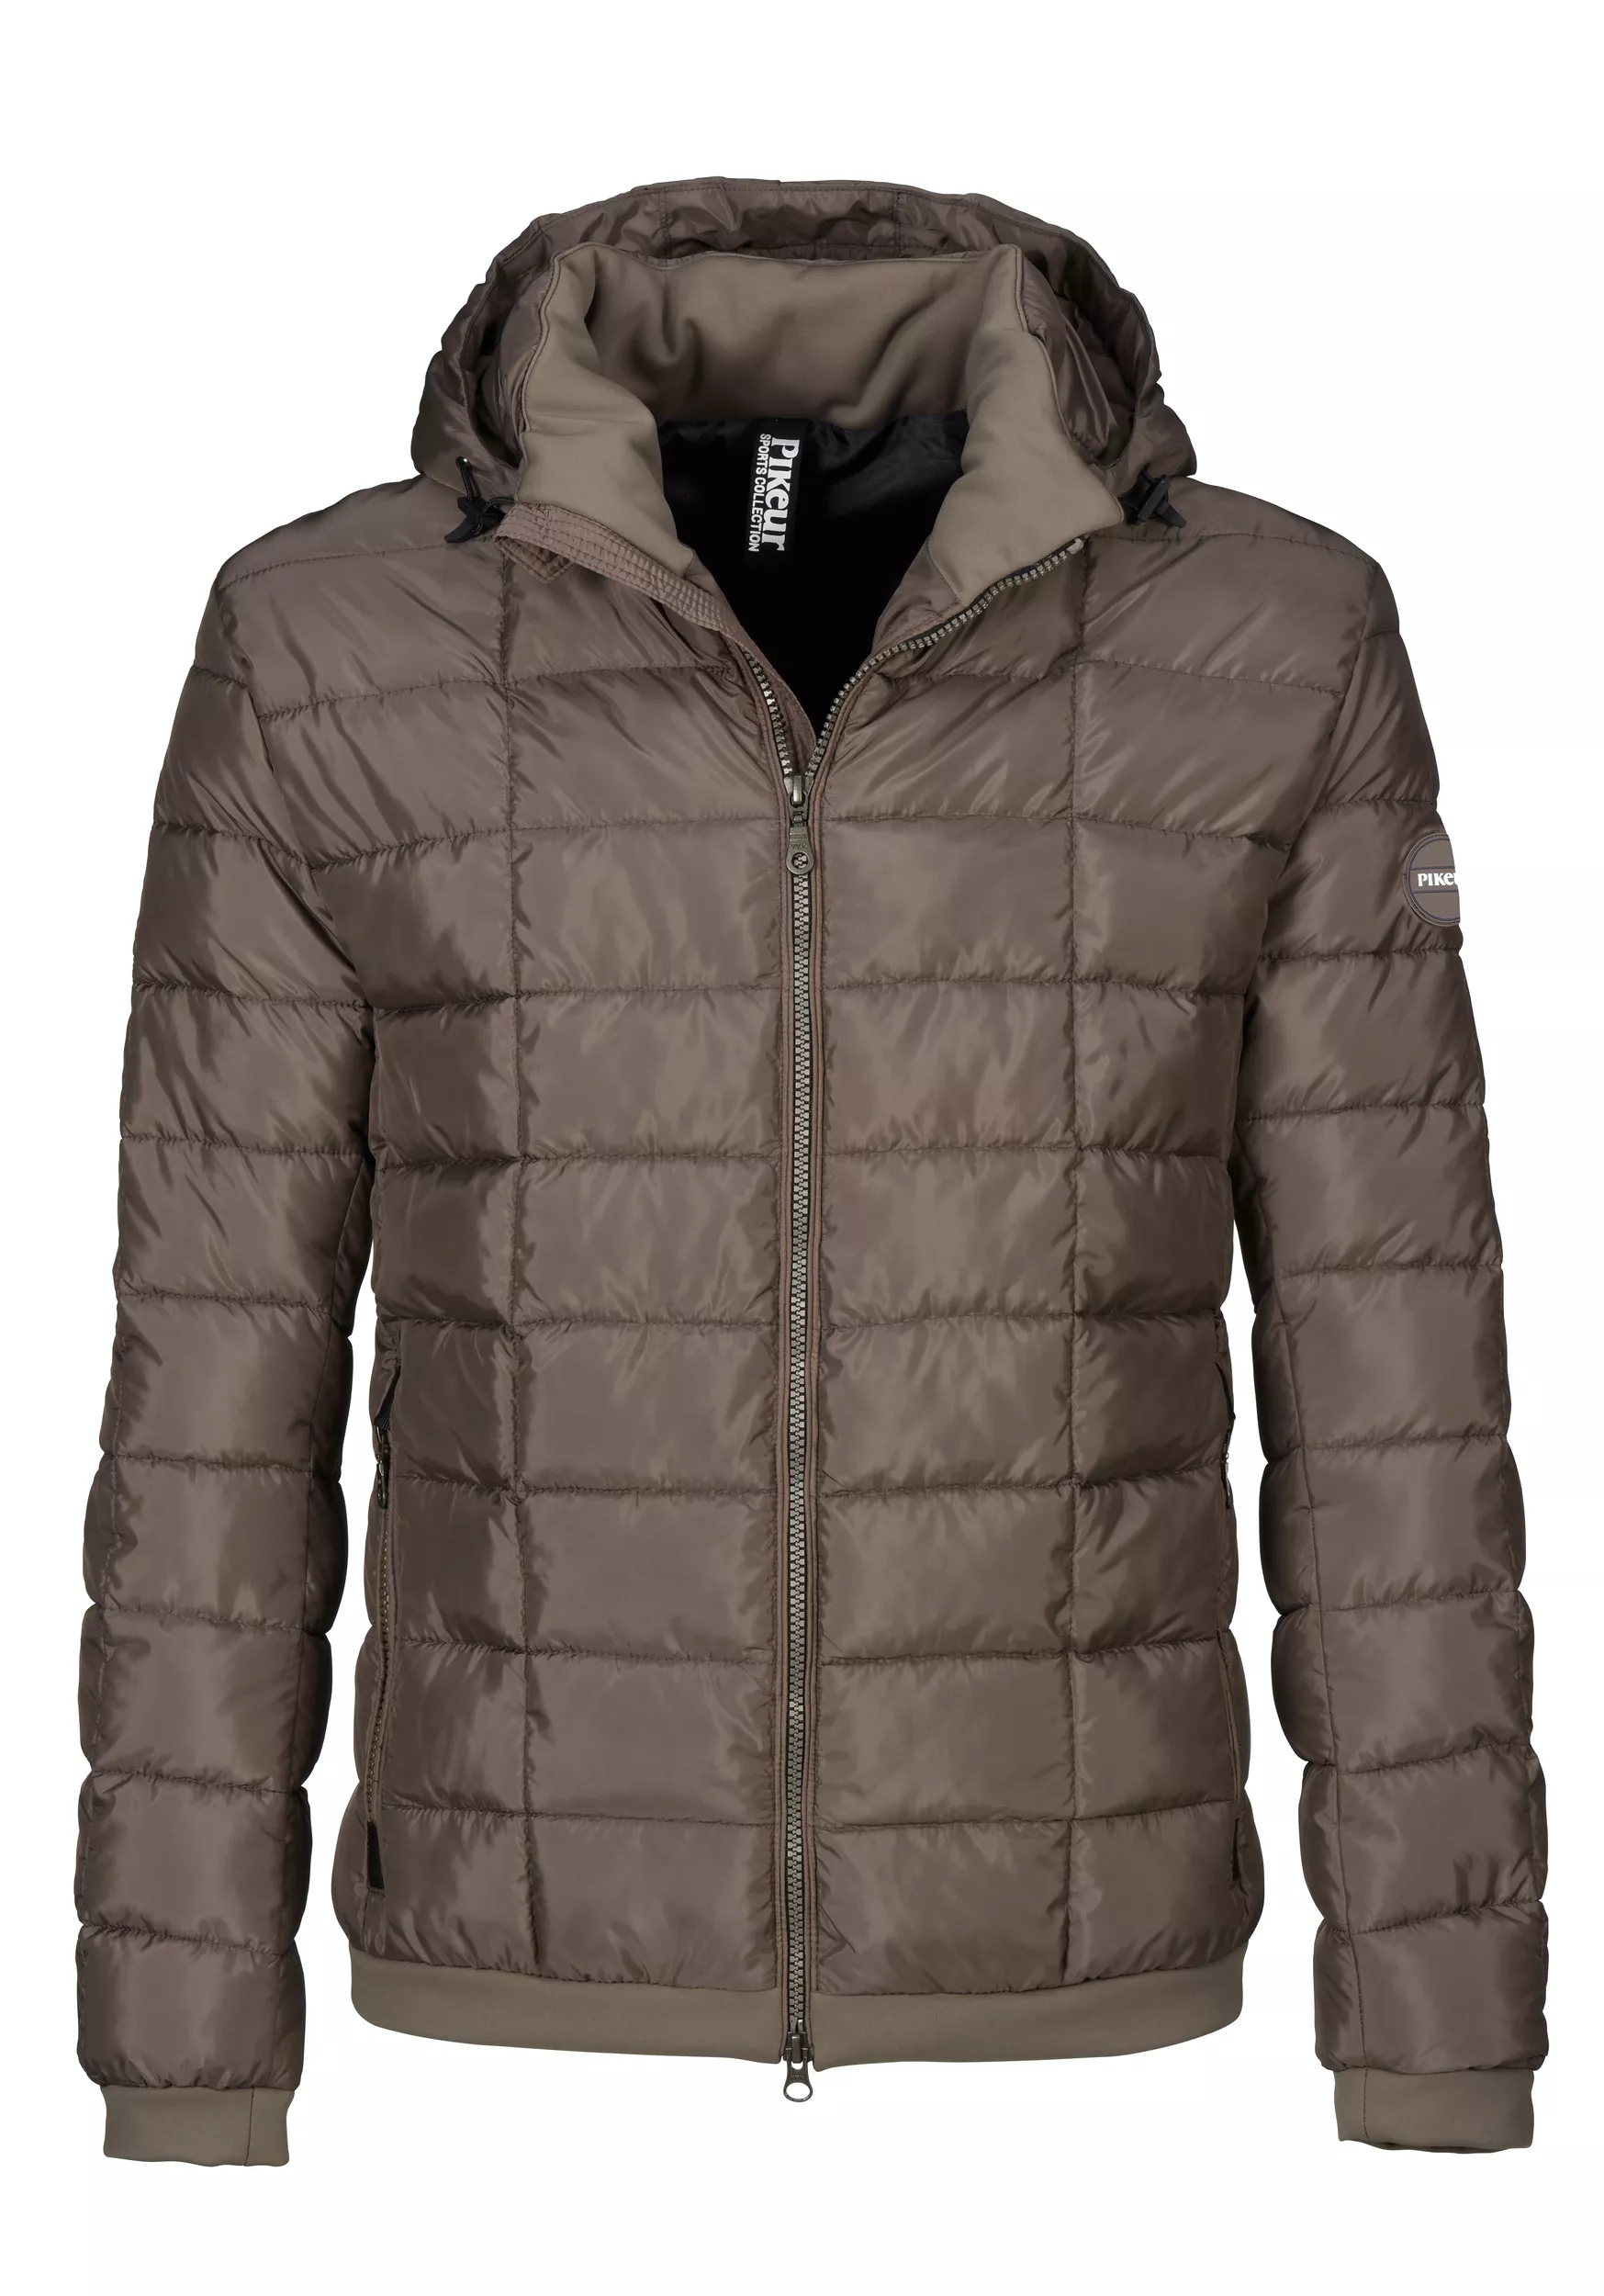 ZAC, men's quilted jacket, falcon